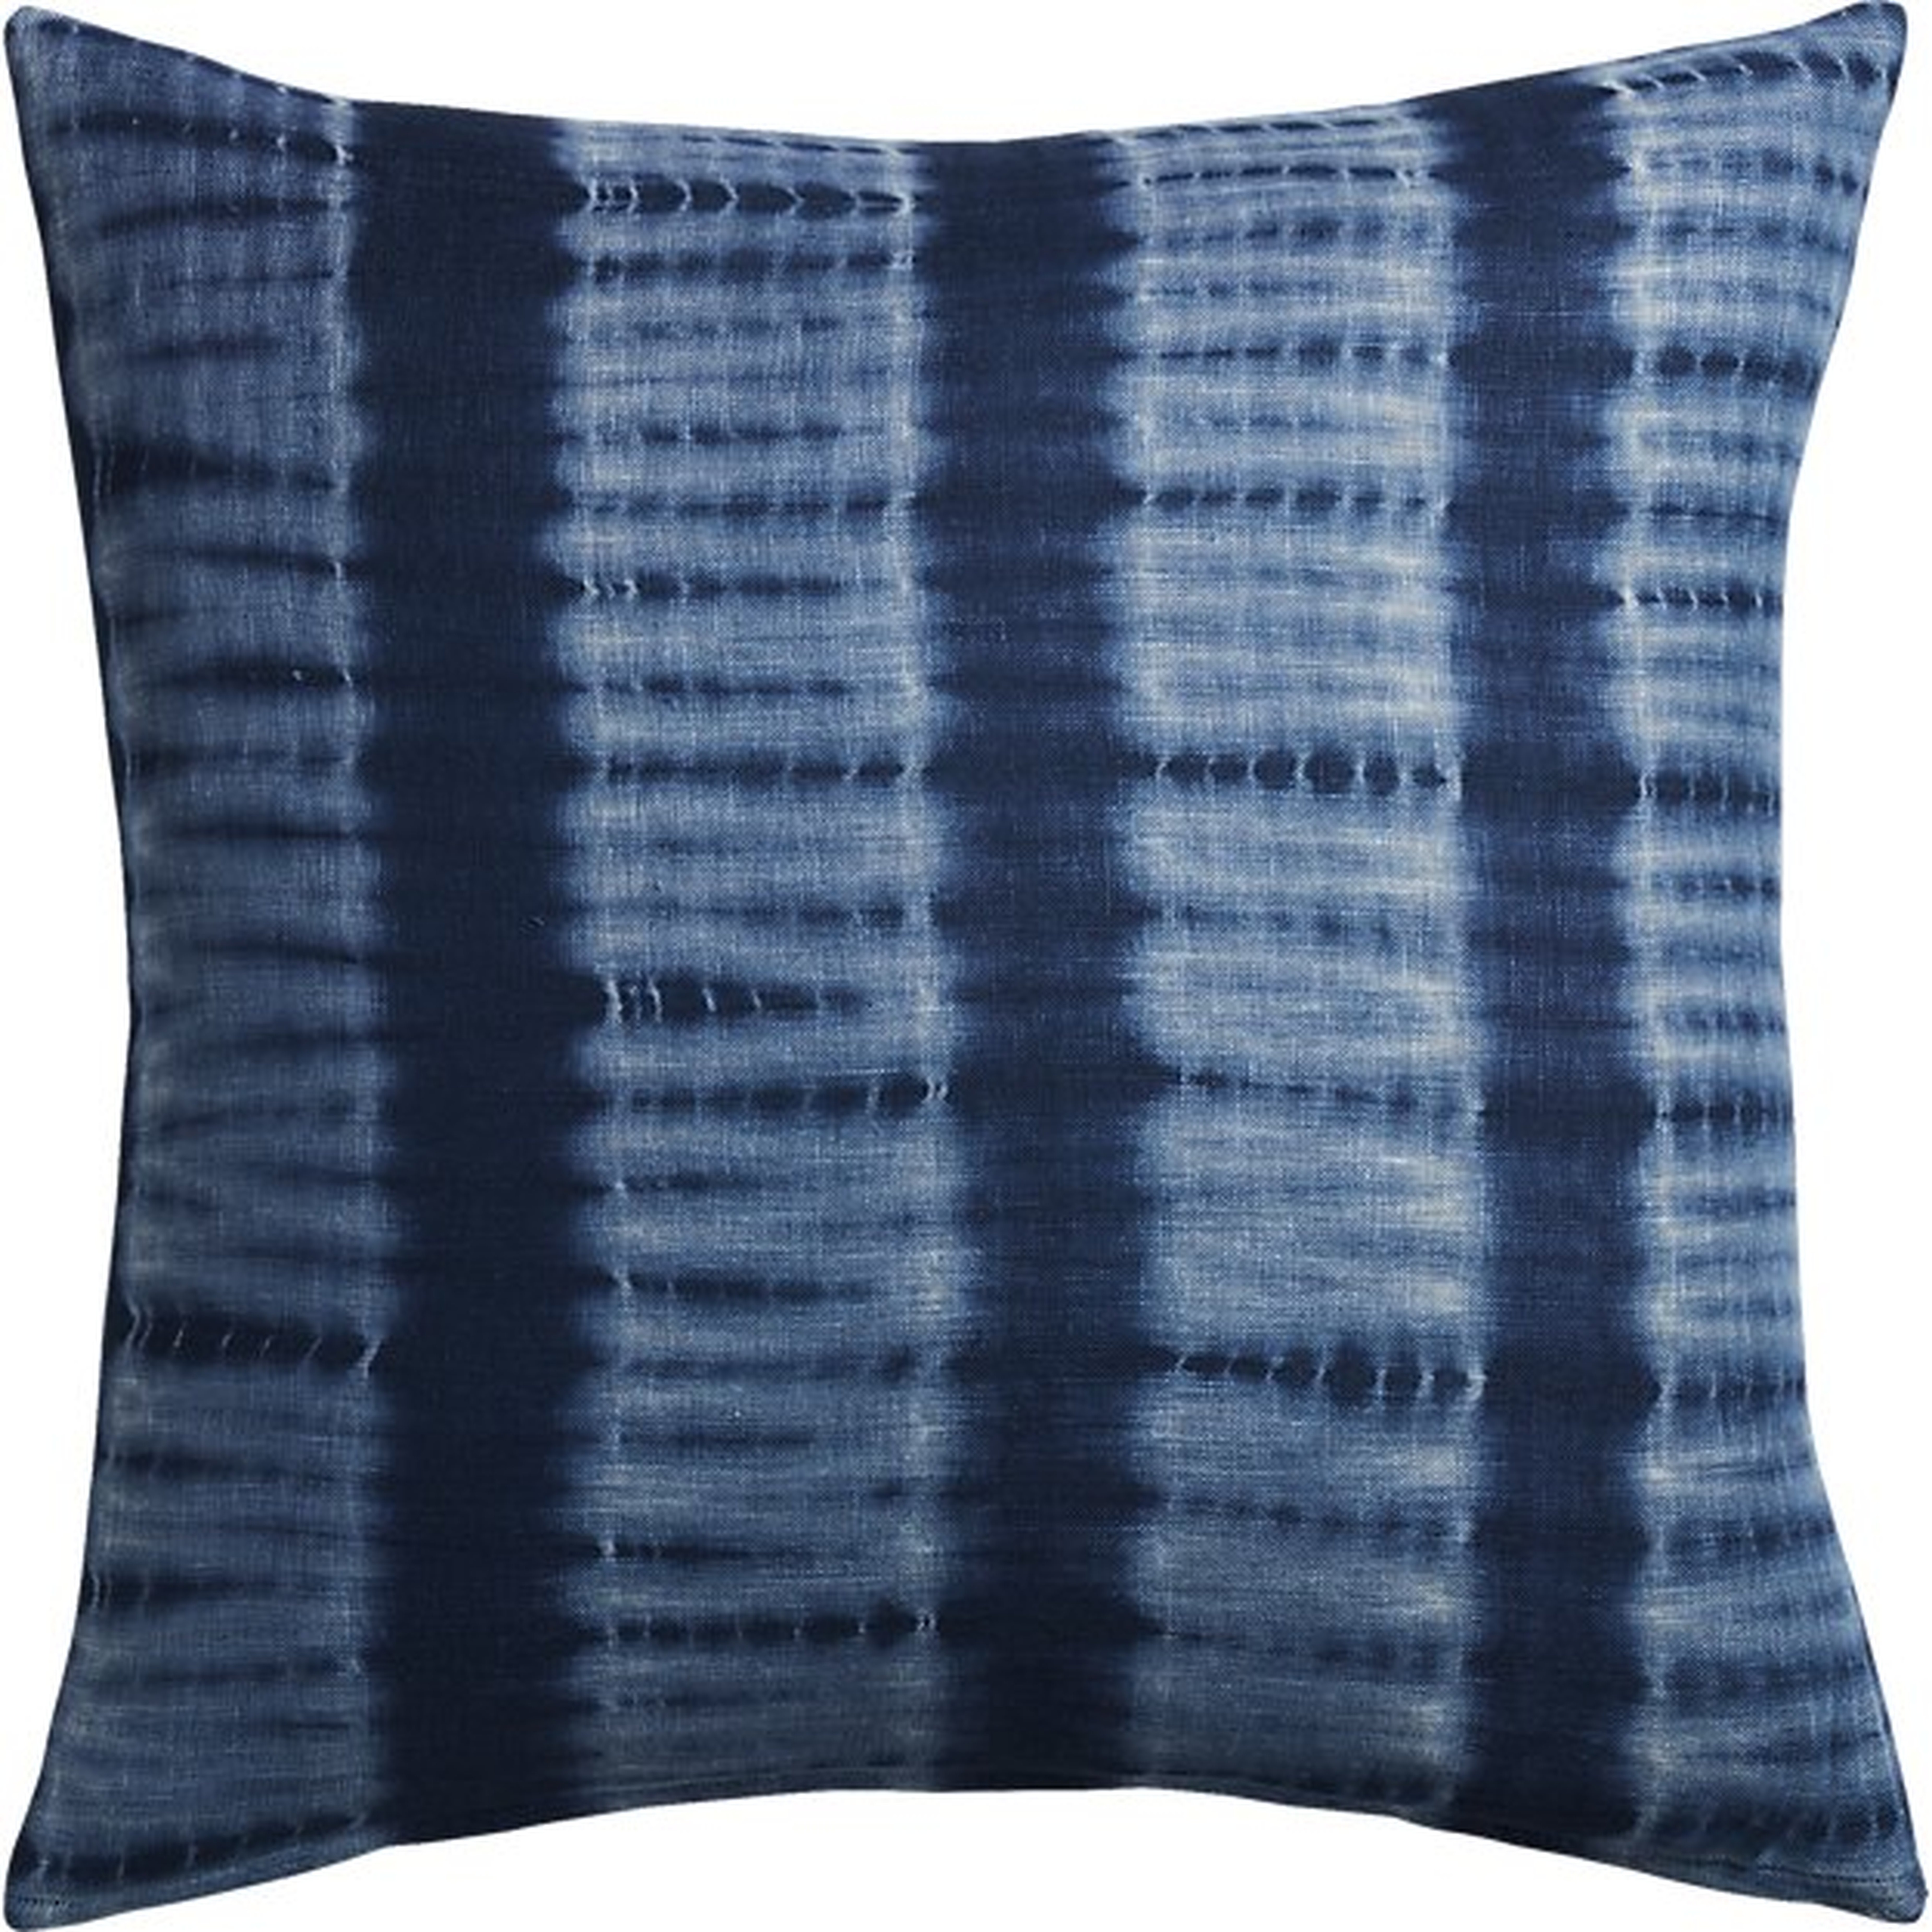 23" indigo blue tie dye pillow with feather-down insert - CB2